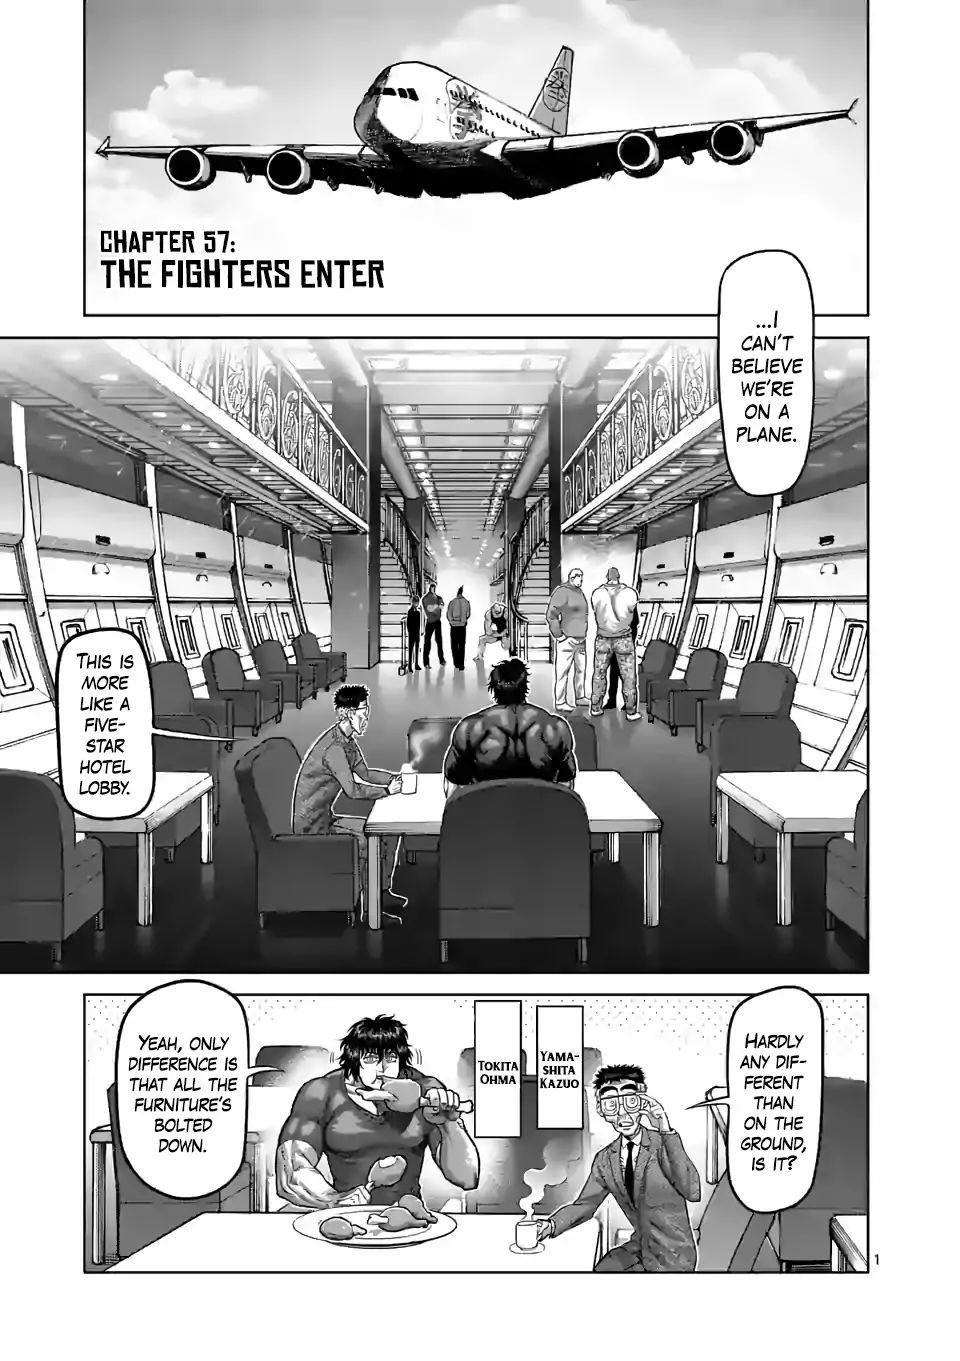 kengan Omega, Chapter 57 : The Fighters Enter